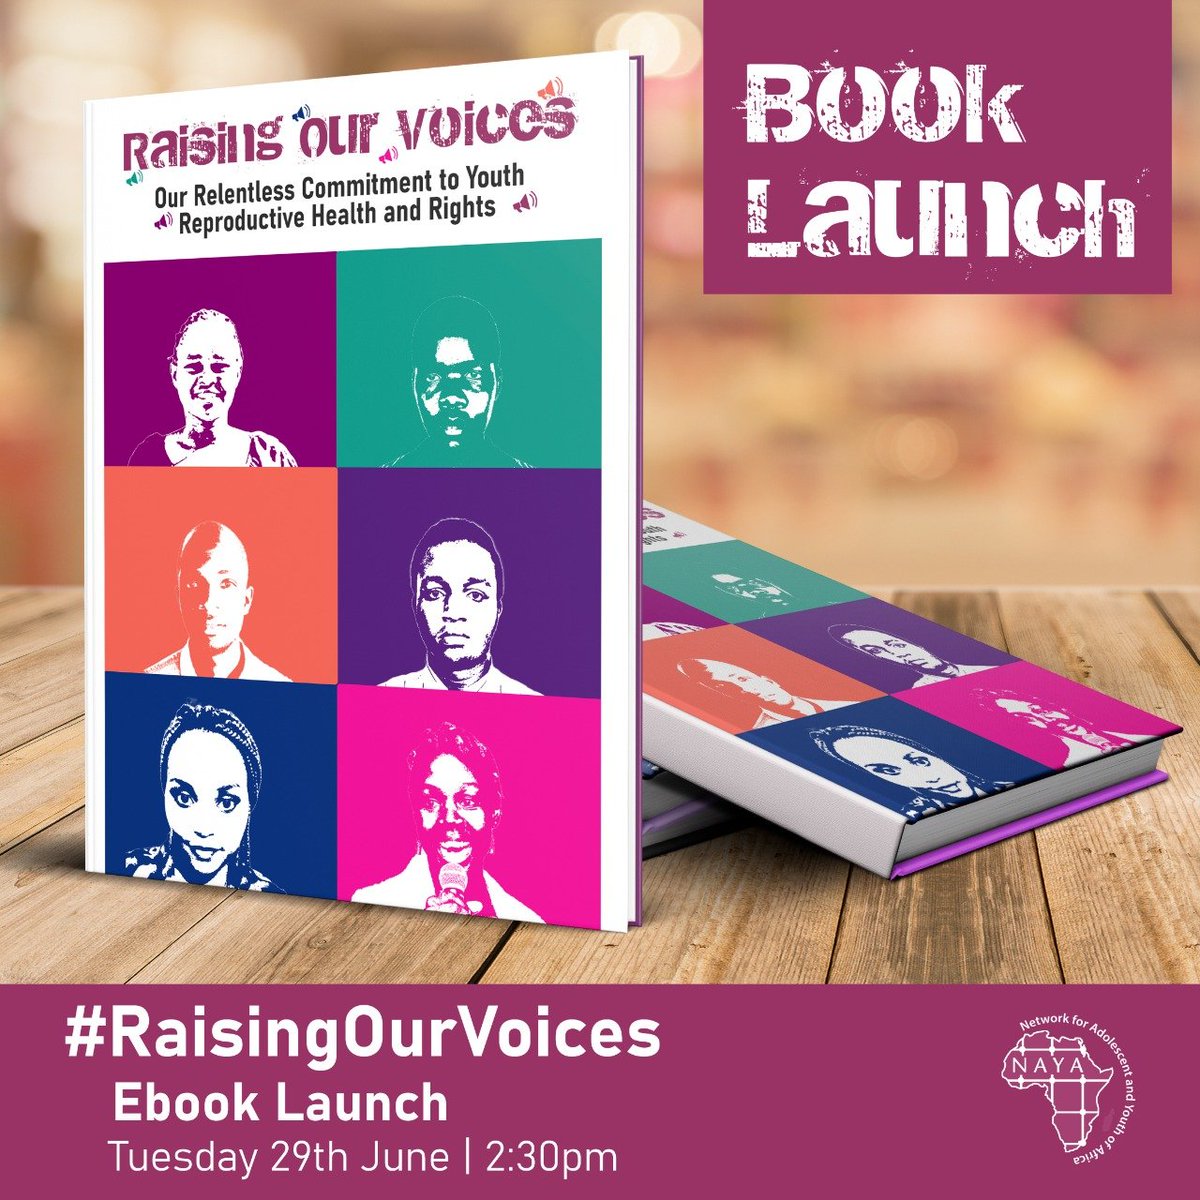 Keep tuned tommorow is the day. @NAYAKenya will be launching its ebook anthology on #Raisingourvoices. This will a milestone in the journey to address adolescent and youth's SRHR challenges.